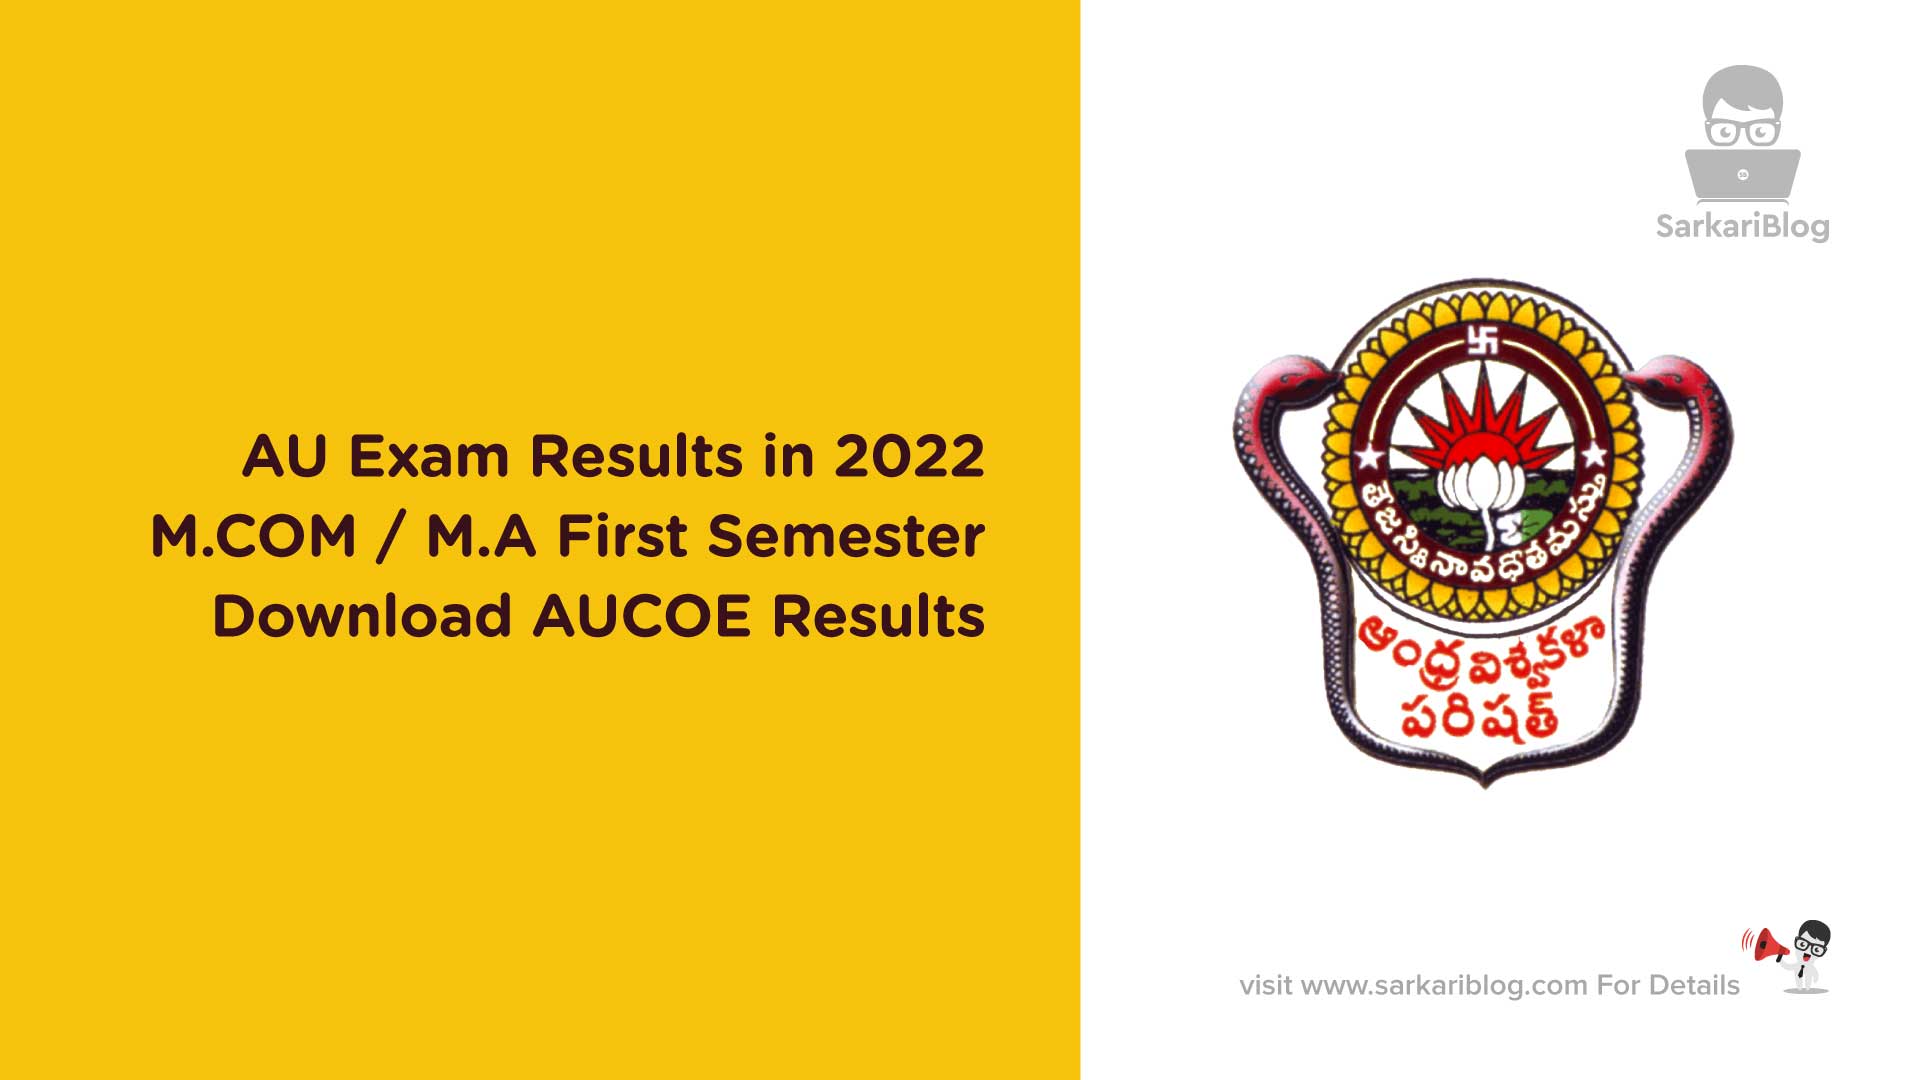 AU Exam Results in 2022